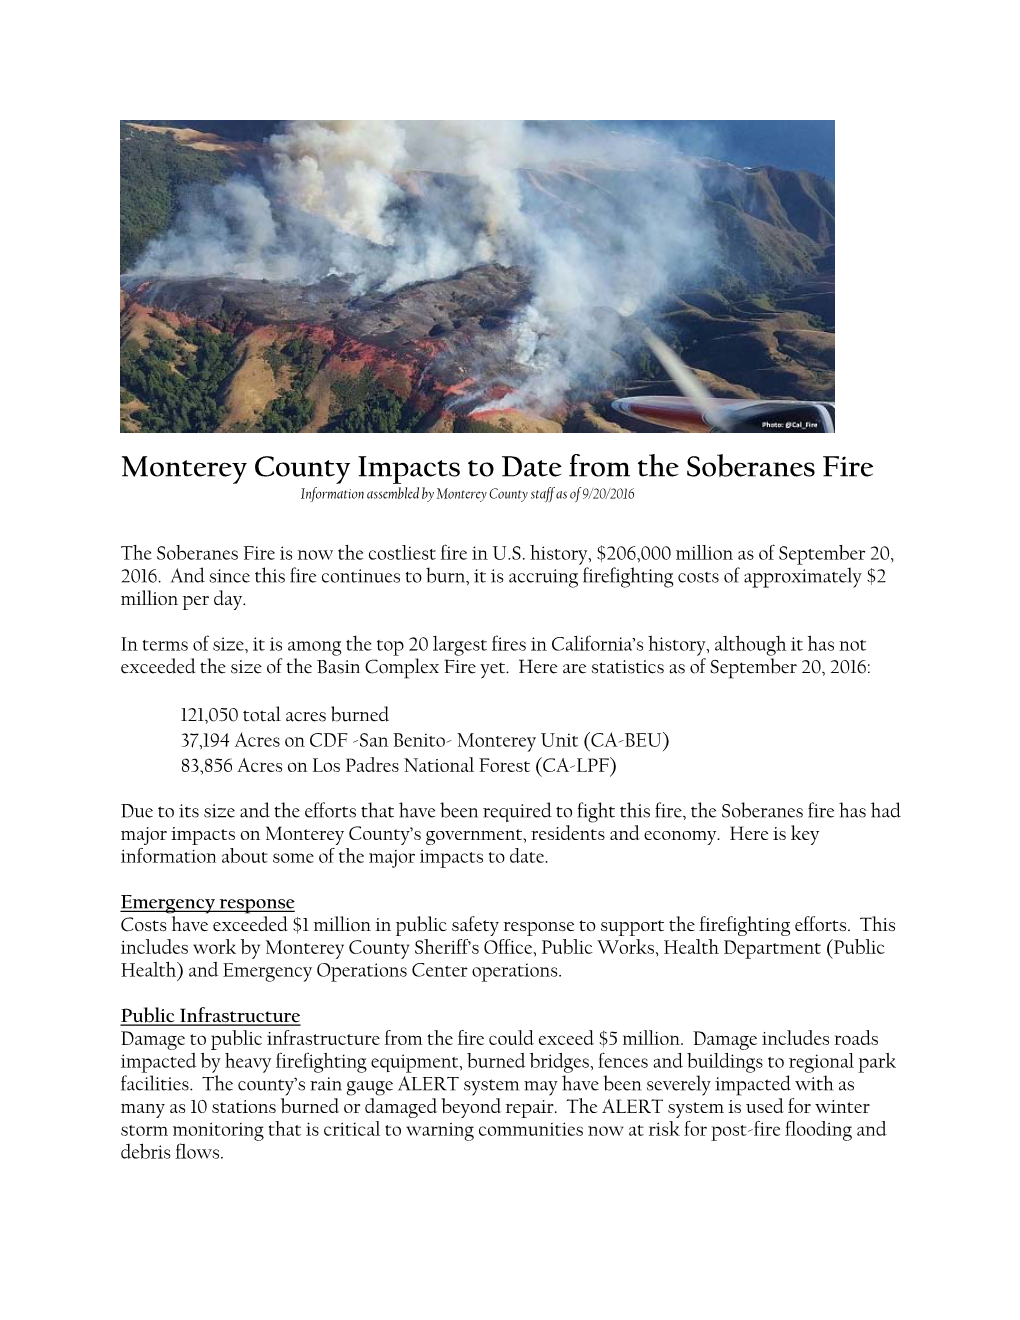 Monterey County Impacts to Date from the Soberanes Fire Information Assembled by Monterey County Staff As of 9/20/2016